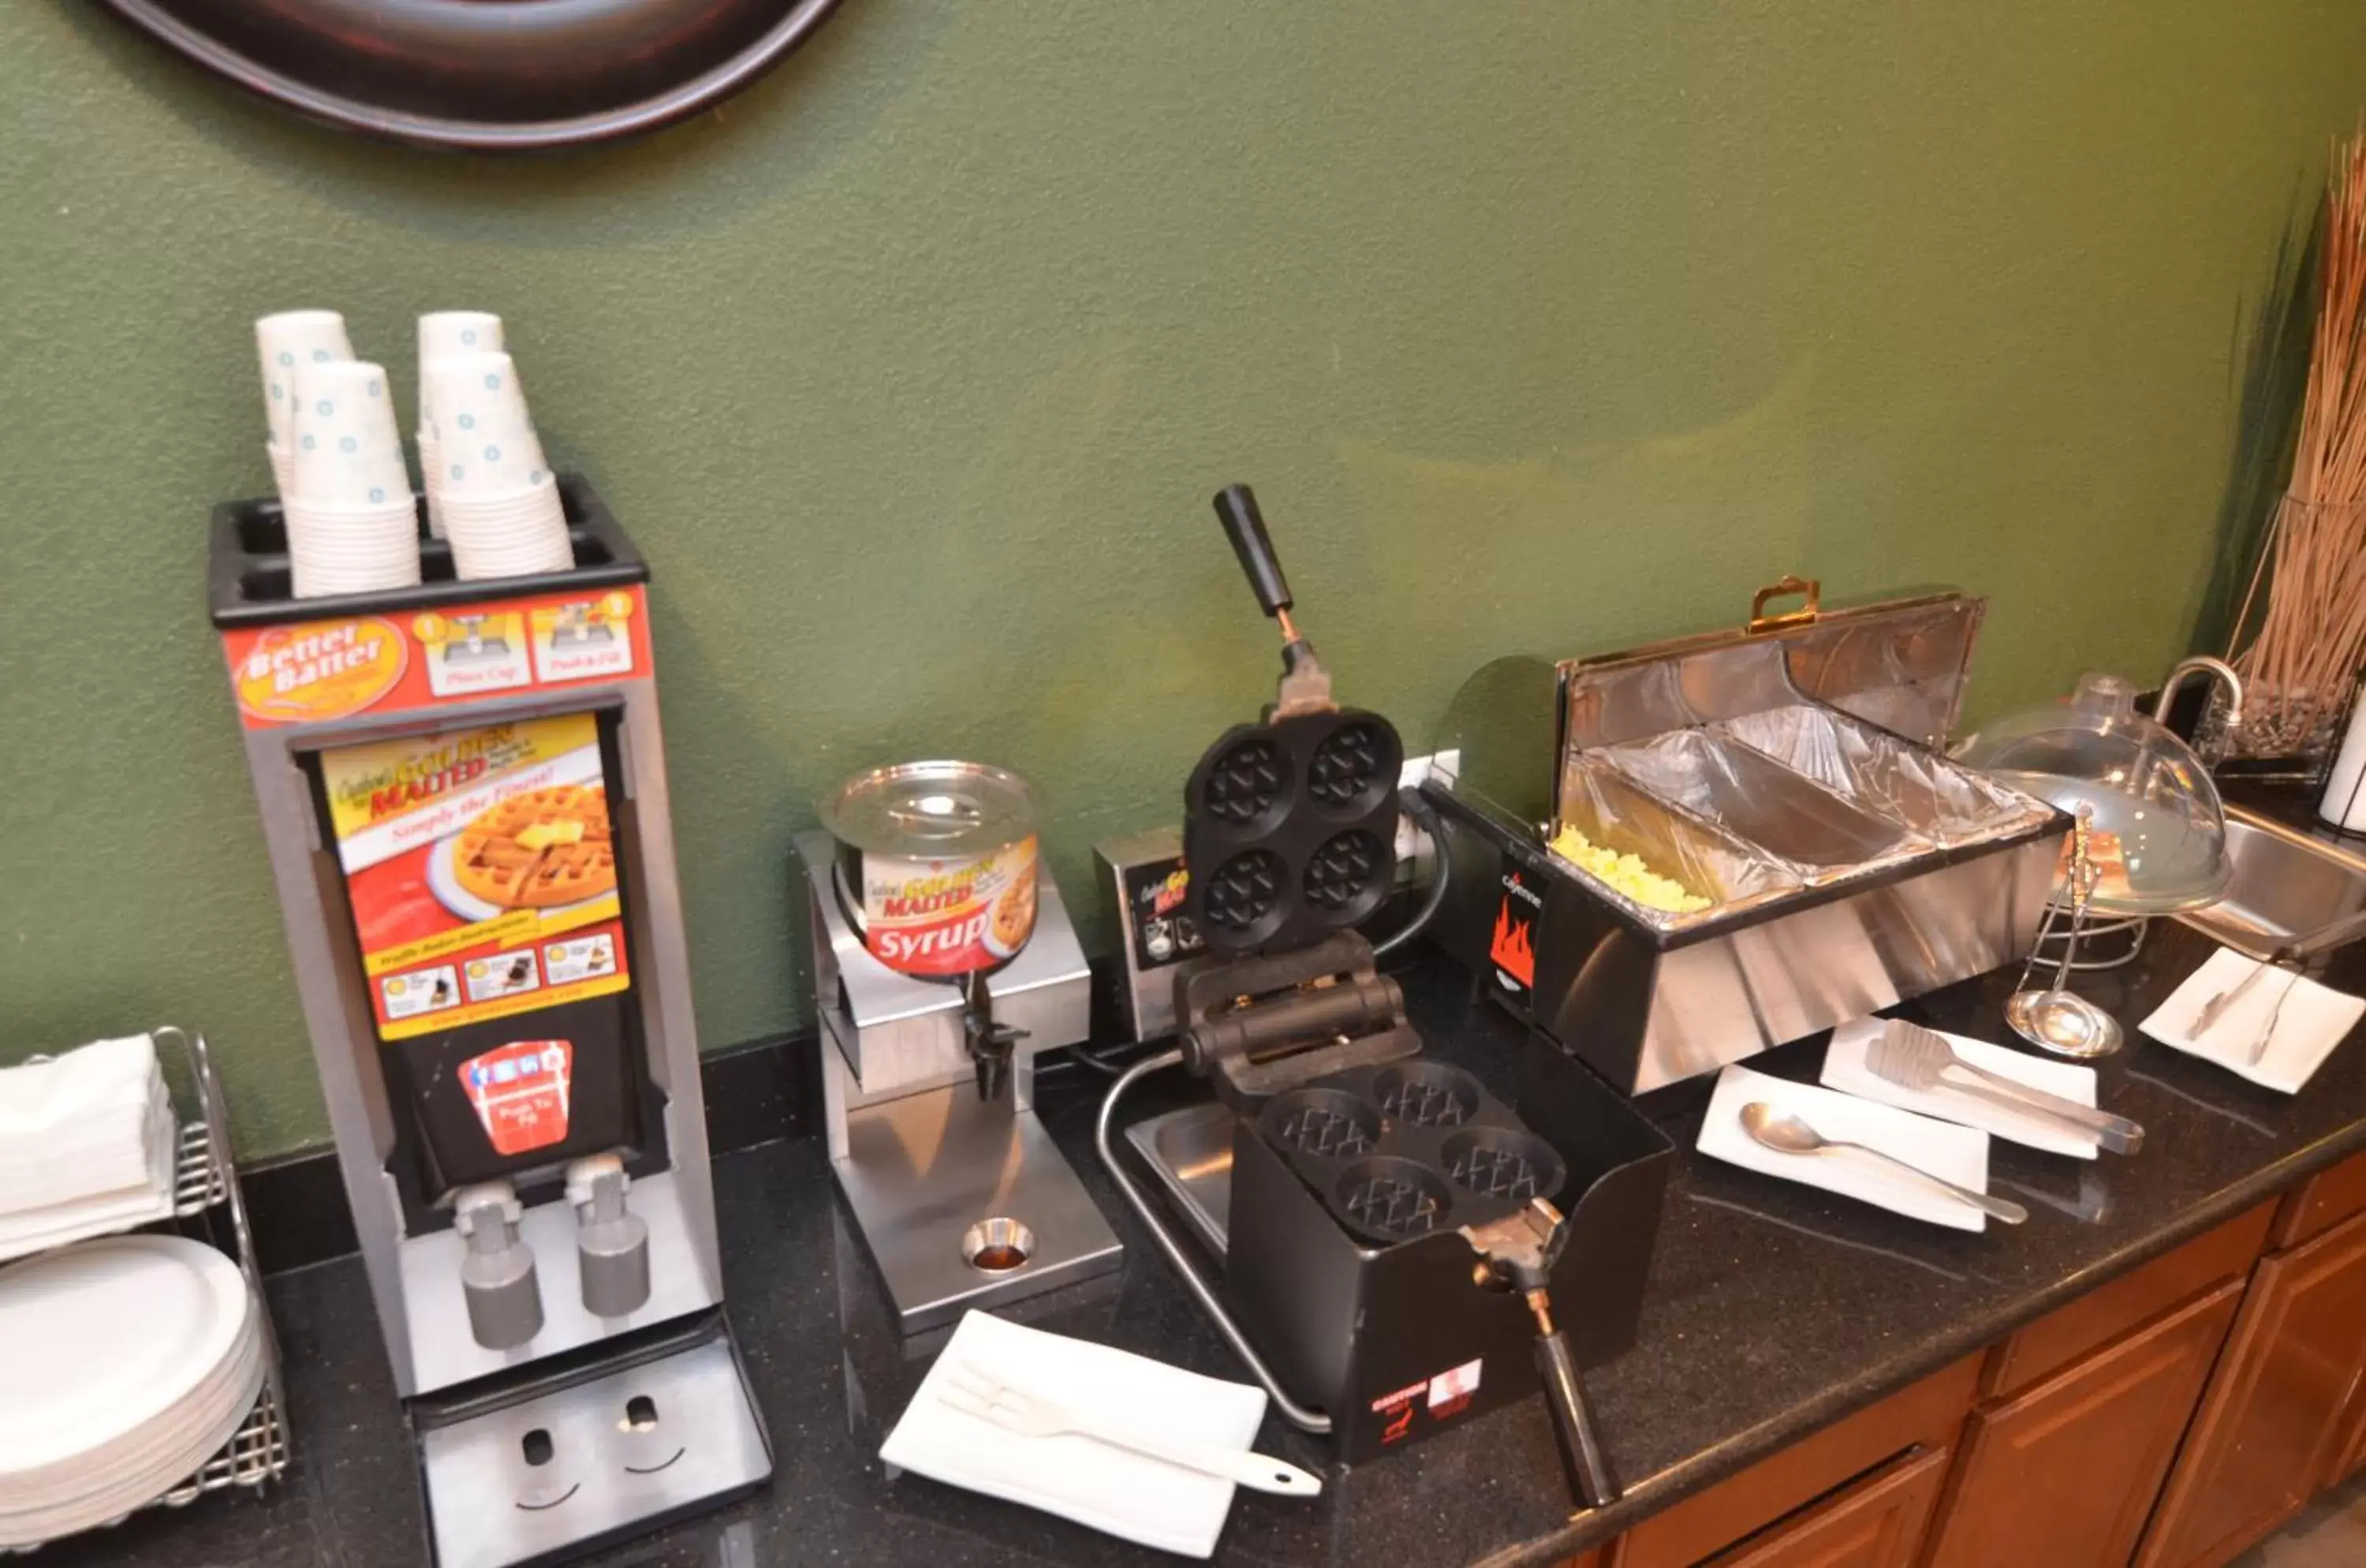 Continental breakfast in AmericInn by Wyndham Des Moines Airport